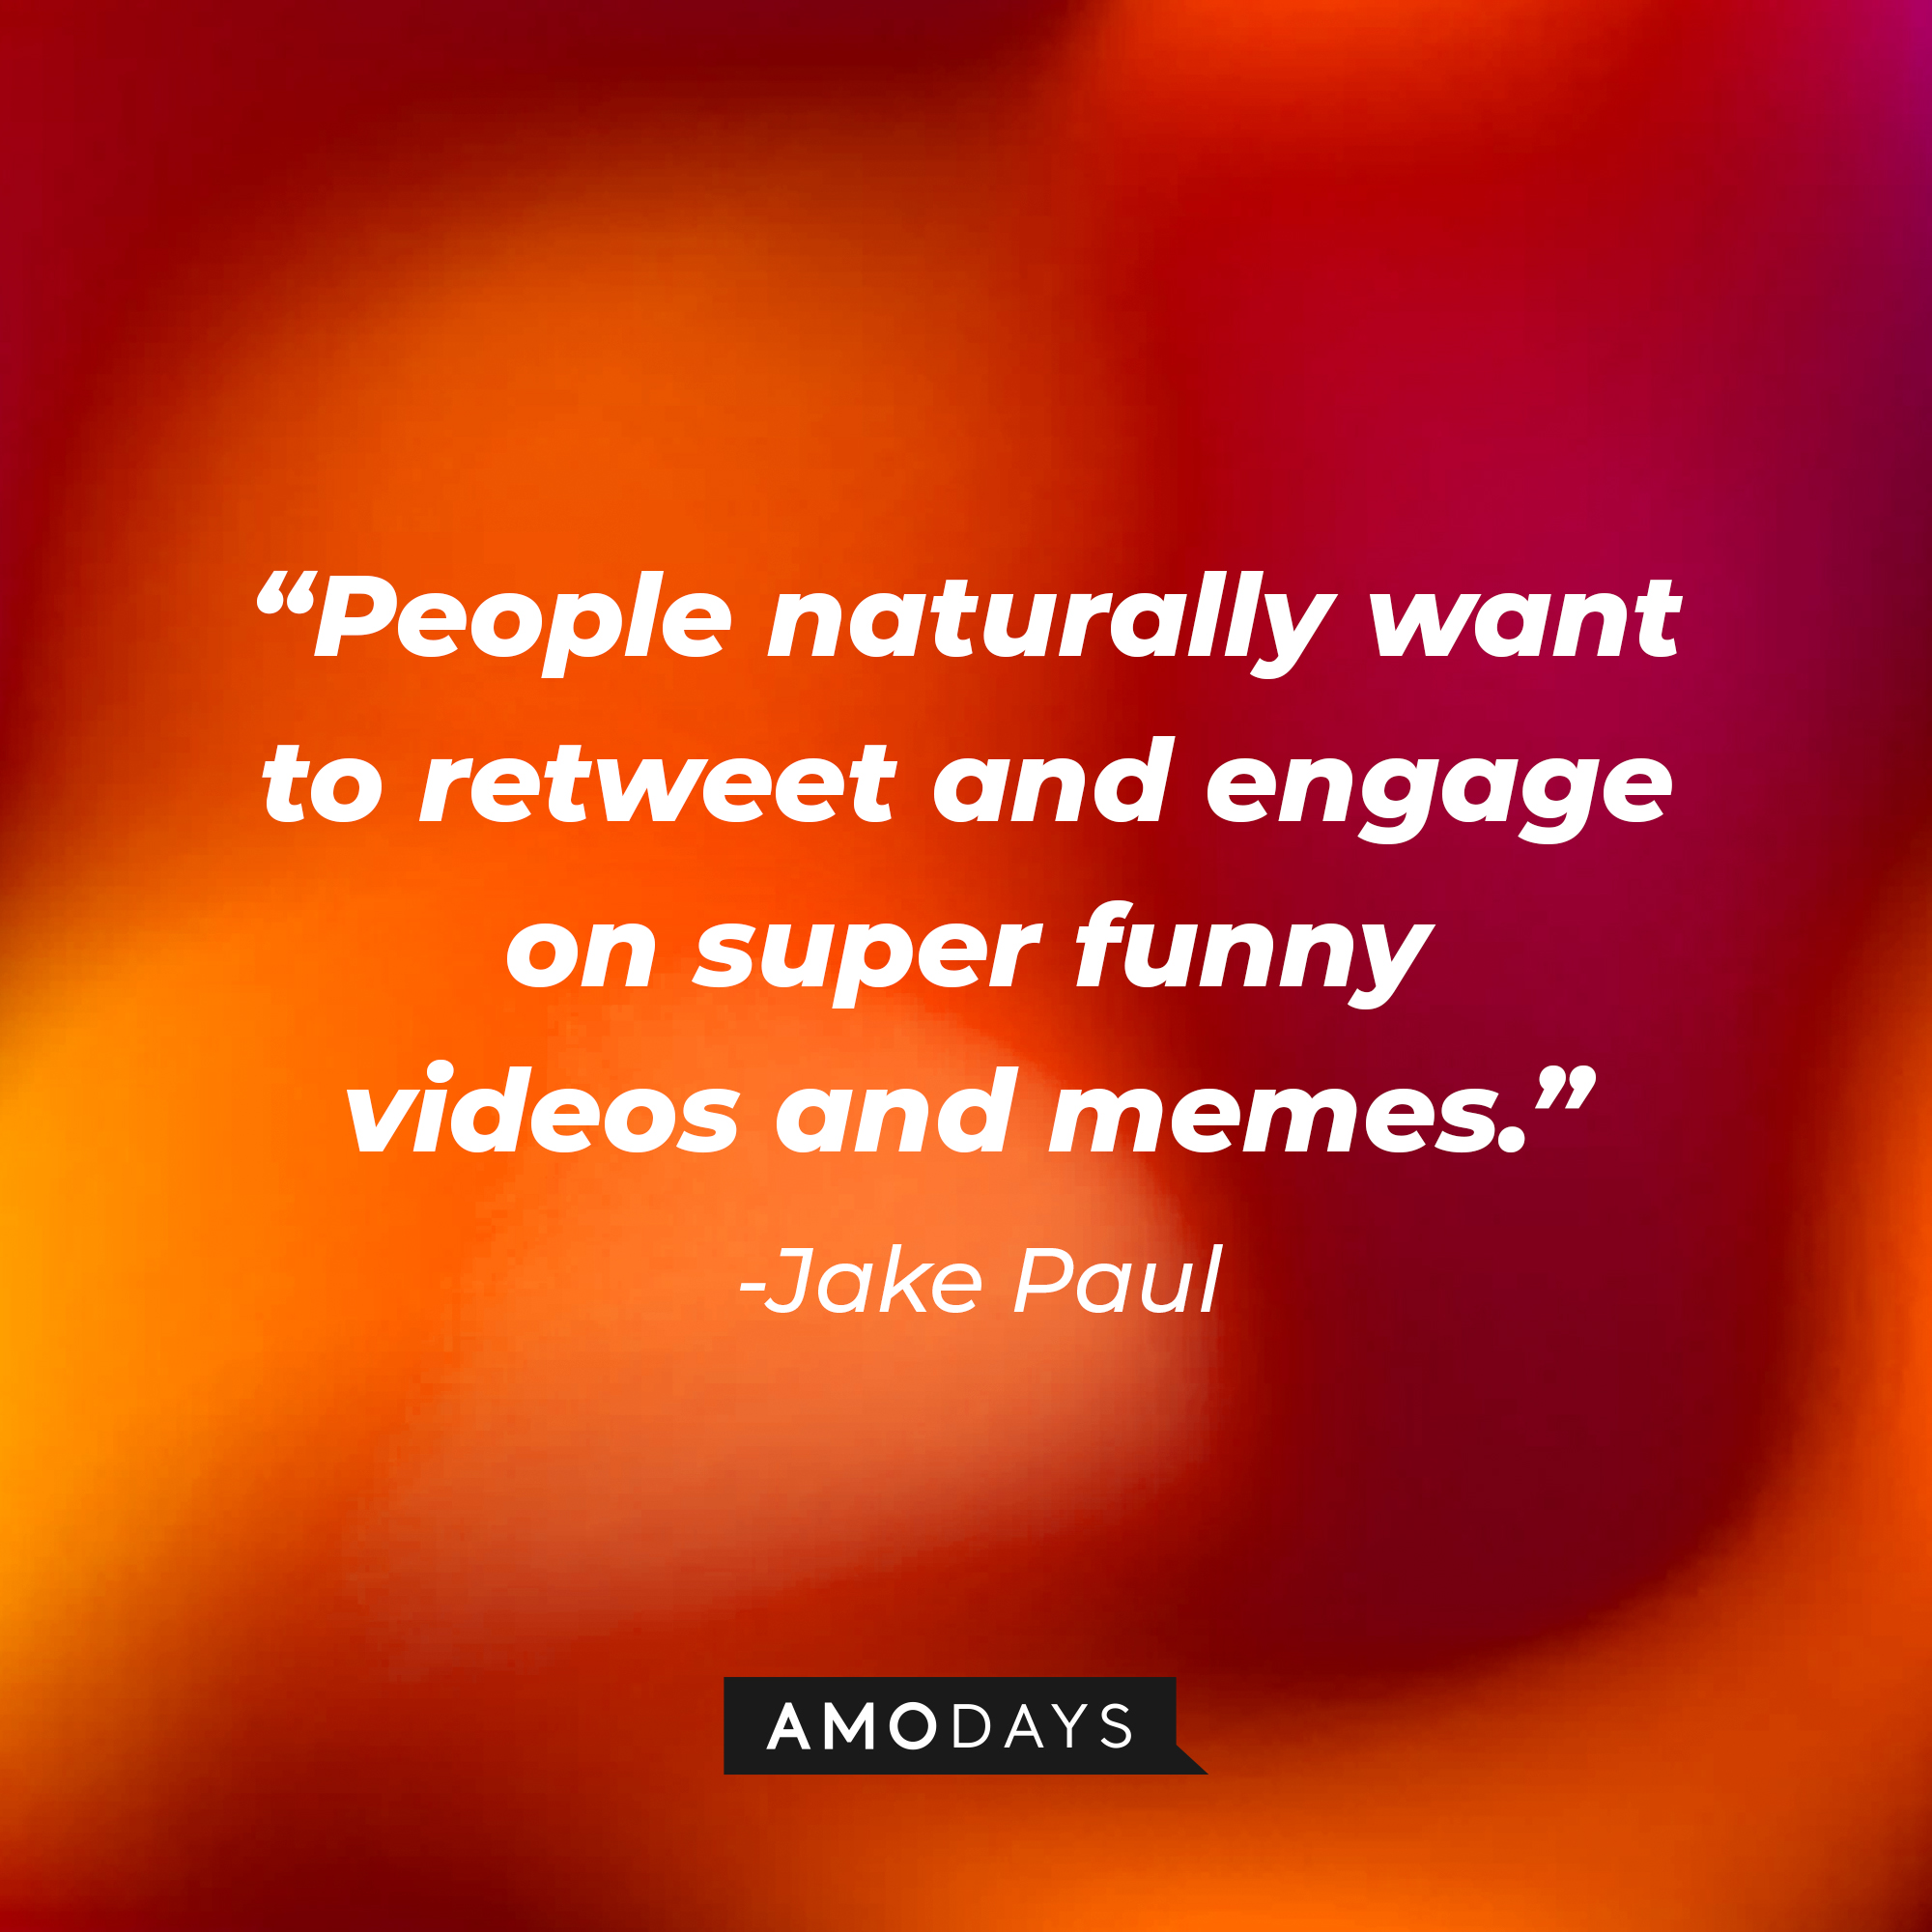 Jake Paul’s quote: "People naturally want to retweet and engage on super funny videos and memes." | Image: Amodays